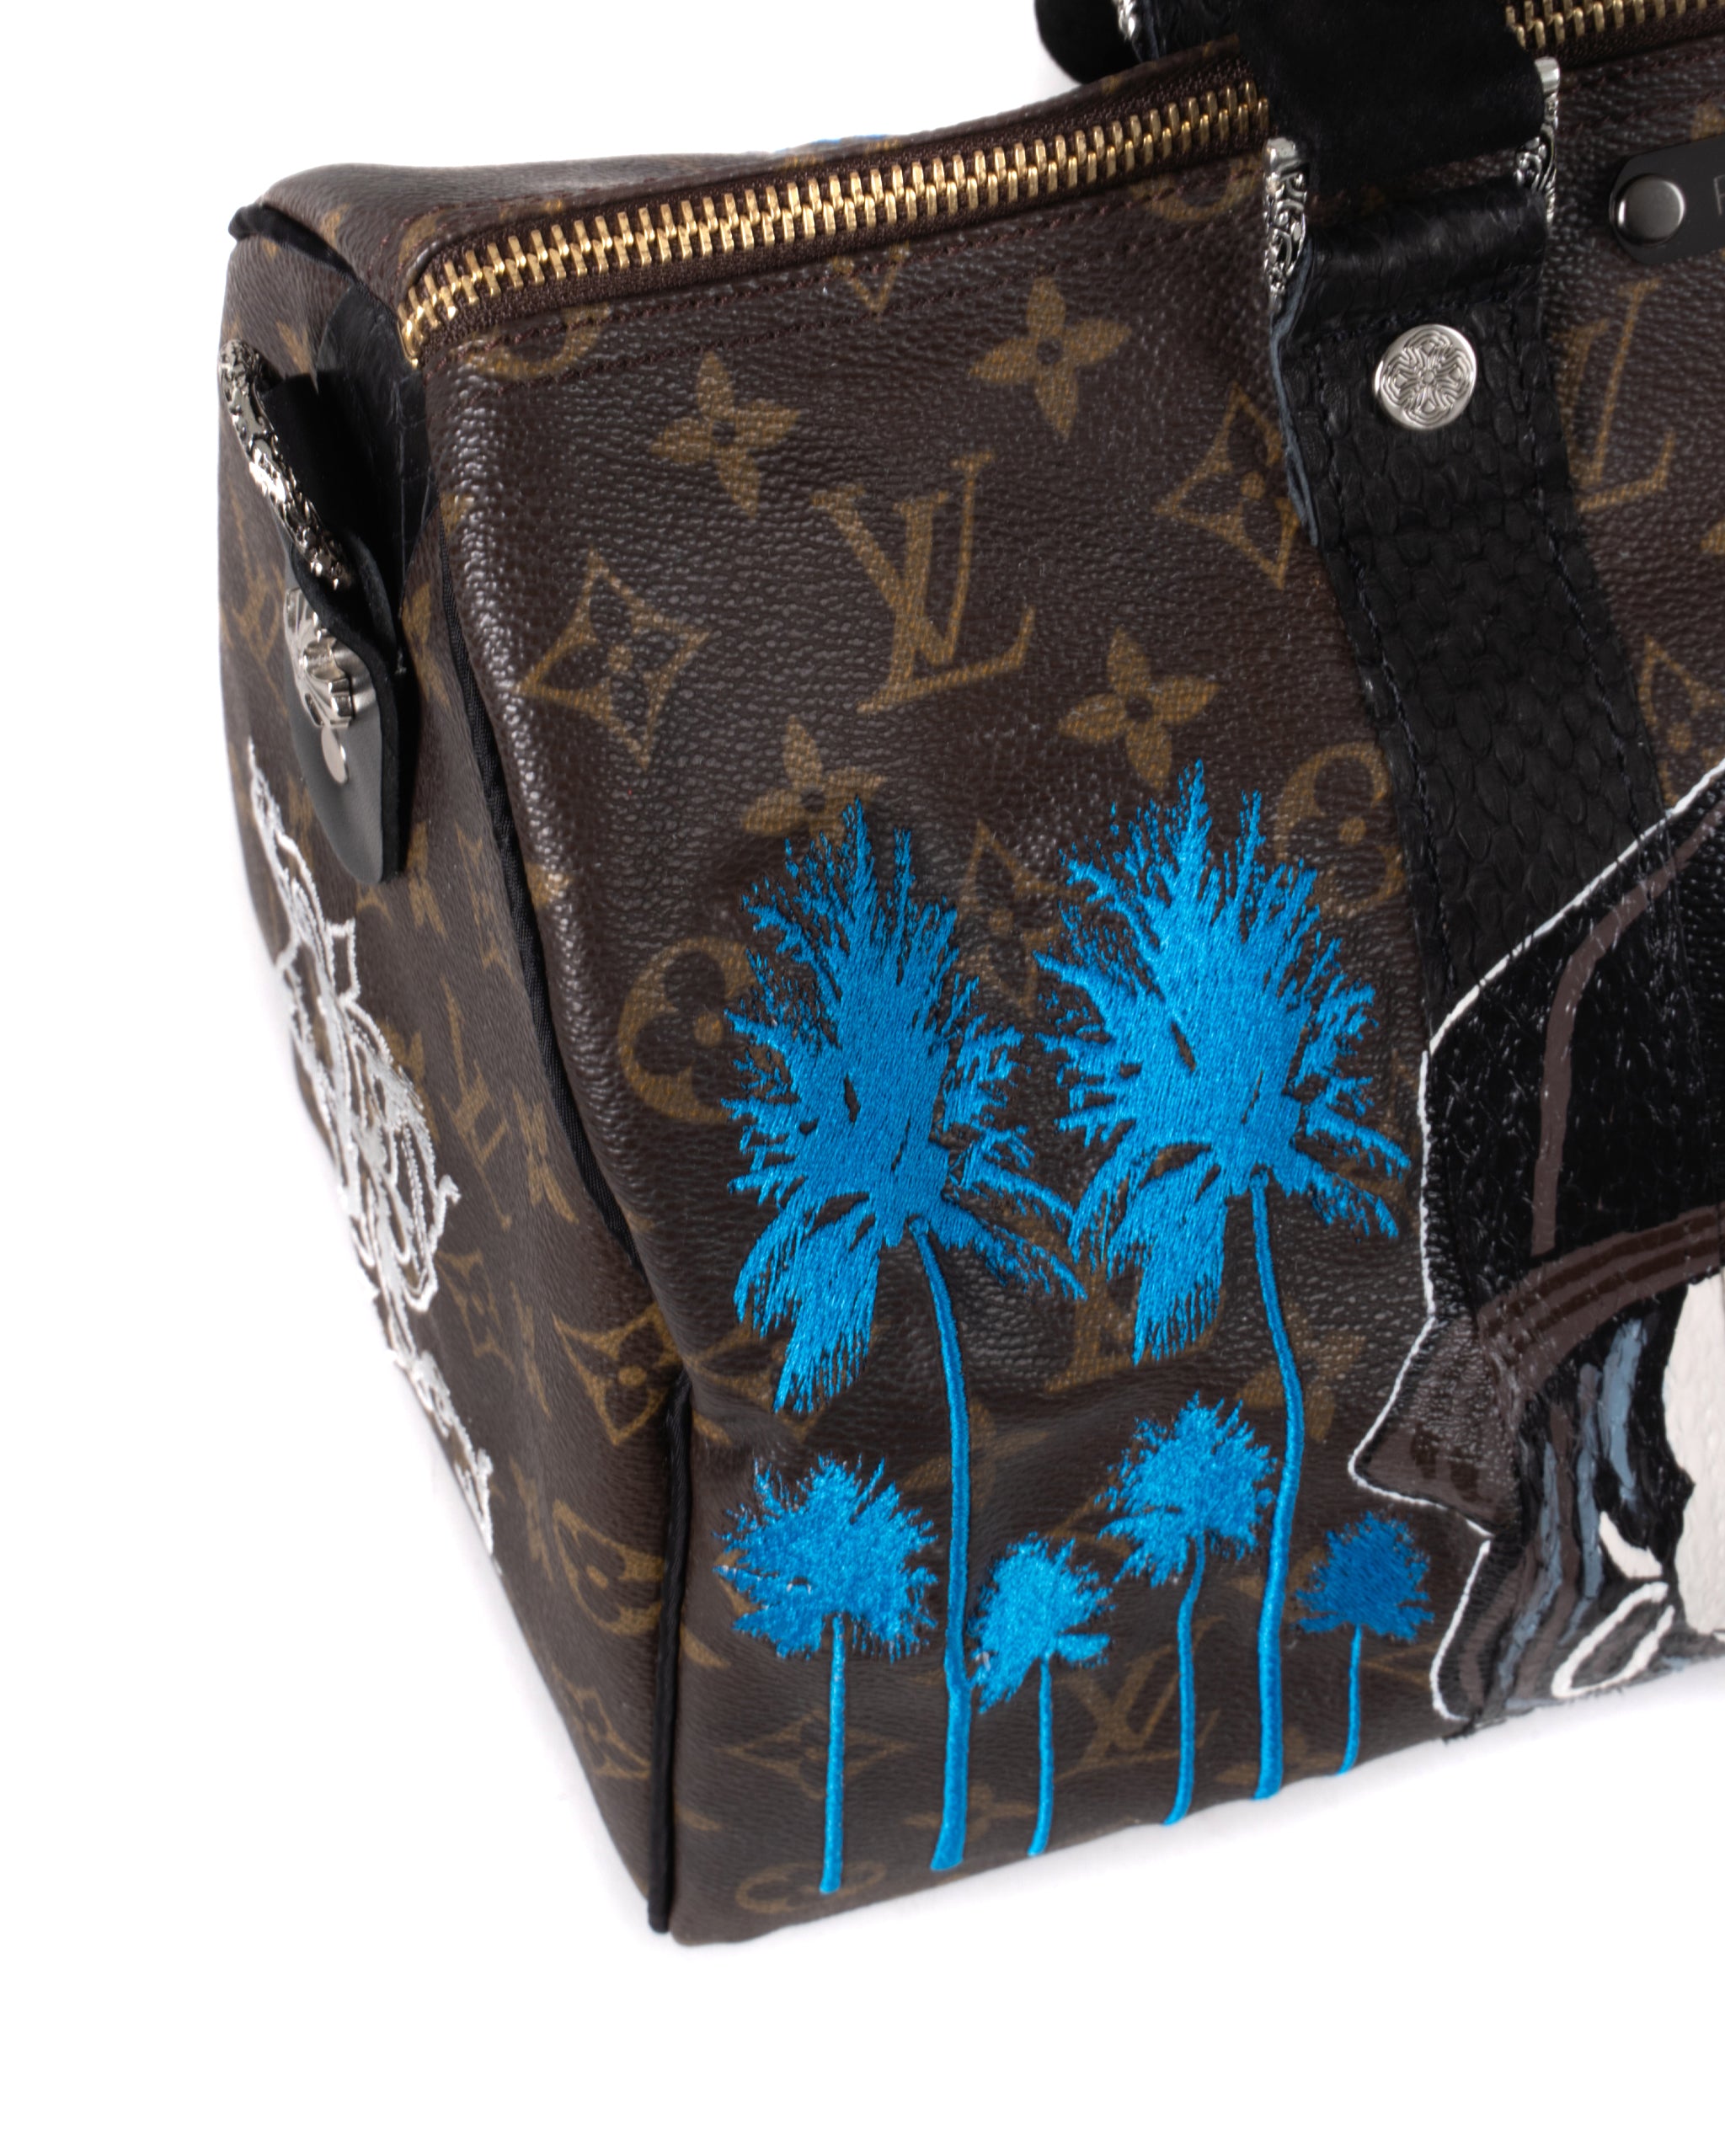 Butterfly of Philip Karto - Louis Vuitton customized bag with